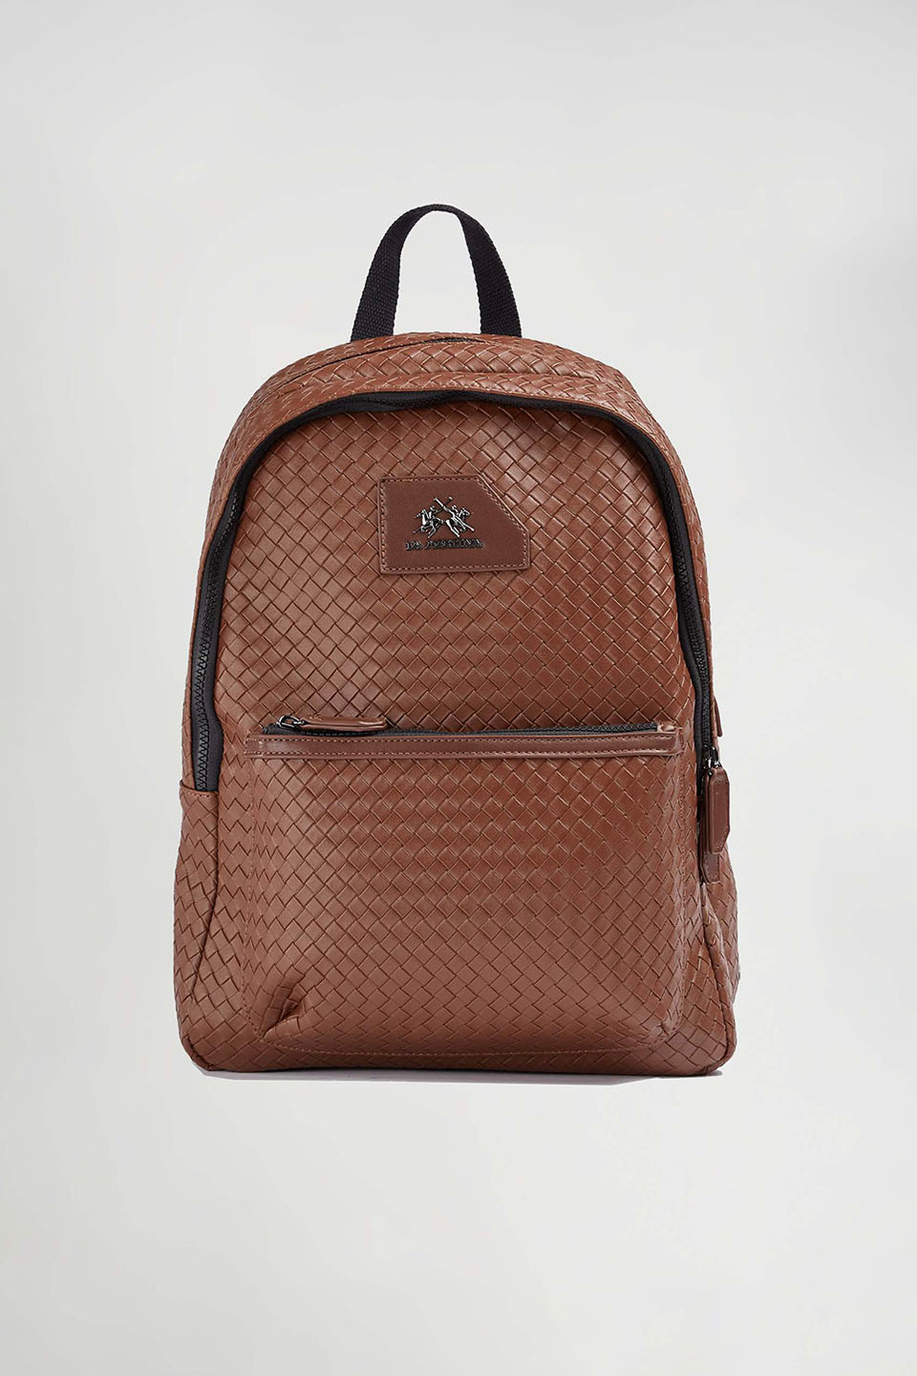 PU leather backpack - New In | La Martina - Official Online Shop